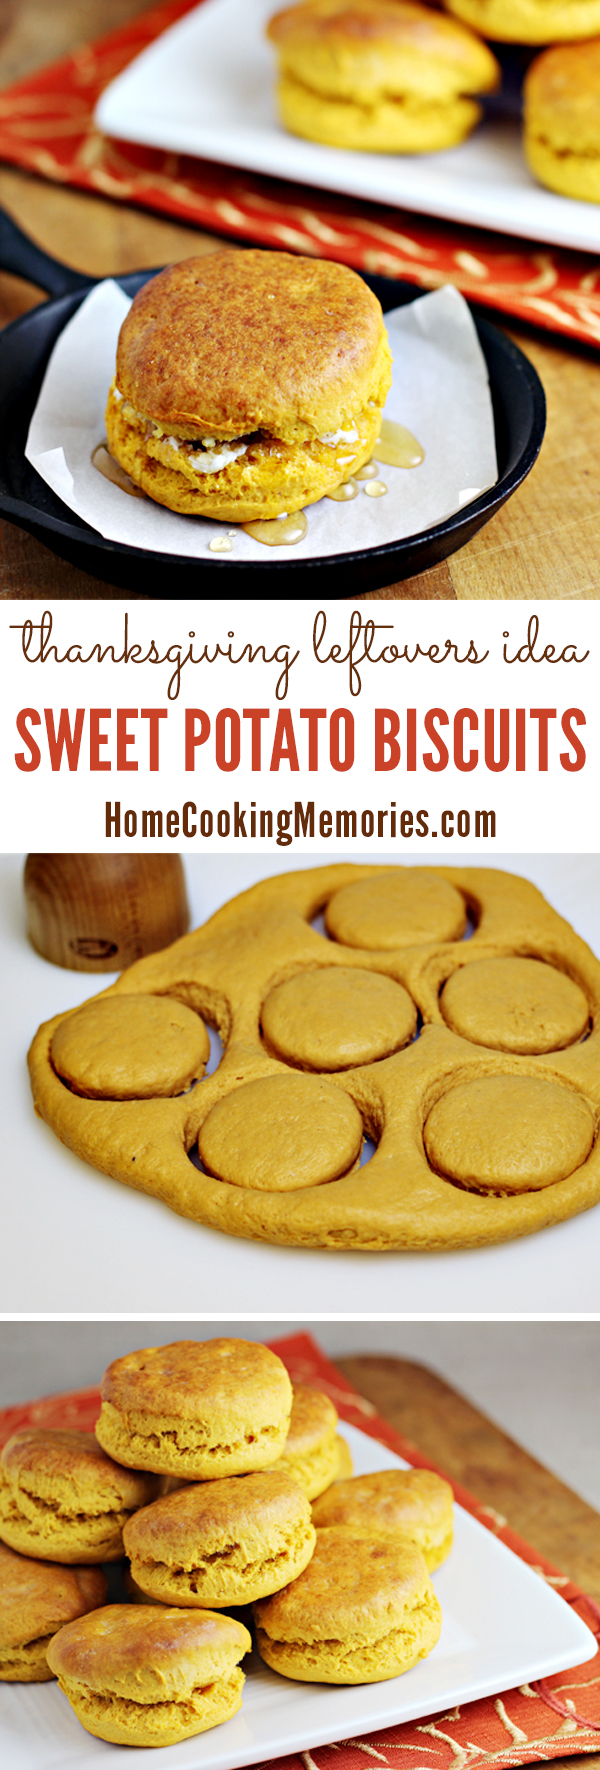 Looking for Thanksgiving leftover recipes? This easy Sweet Potato Biscuits recipe uses leftover sweet potato casserole - even if you make it with marshmallows on top!